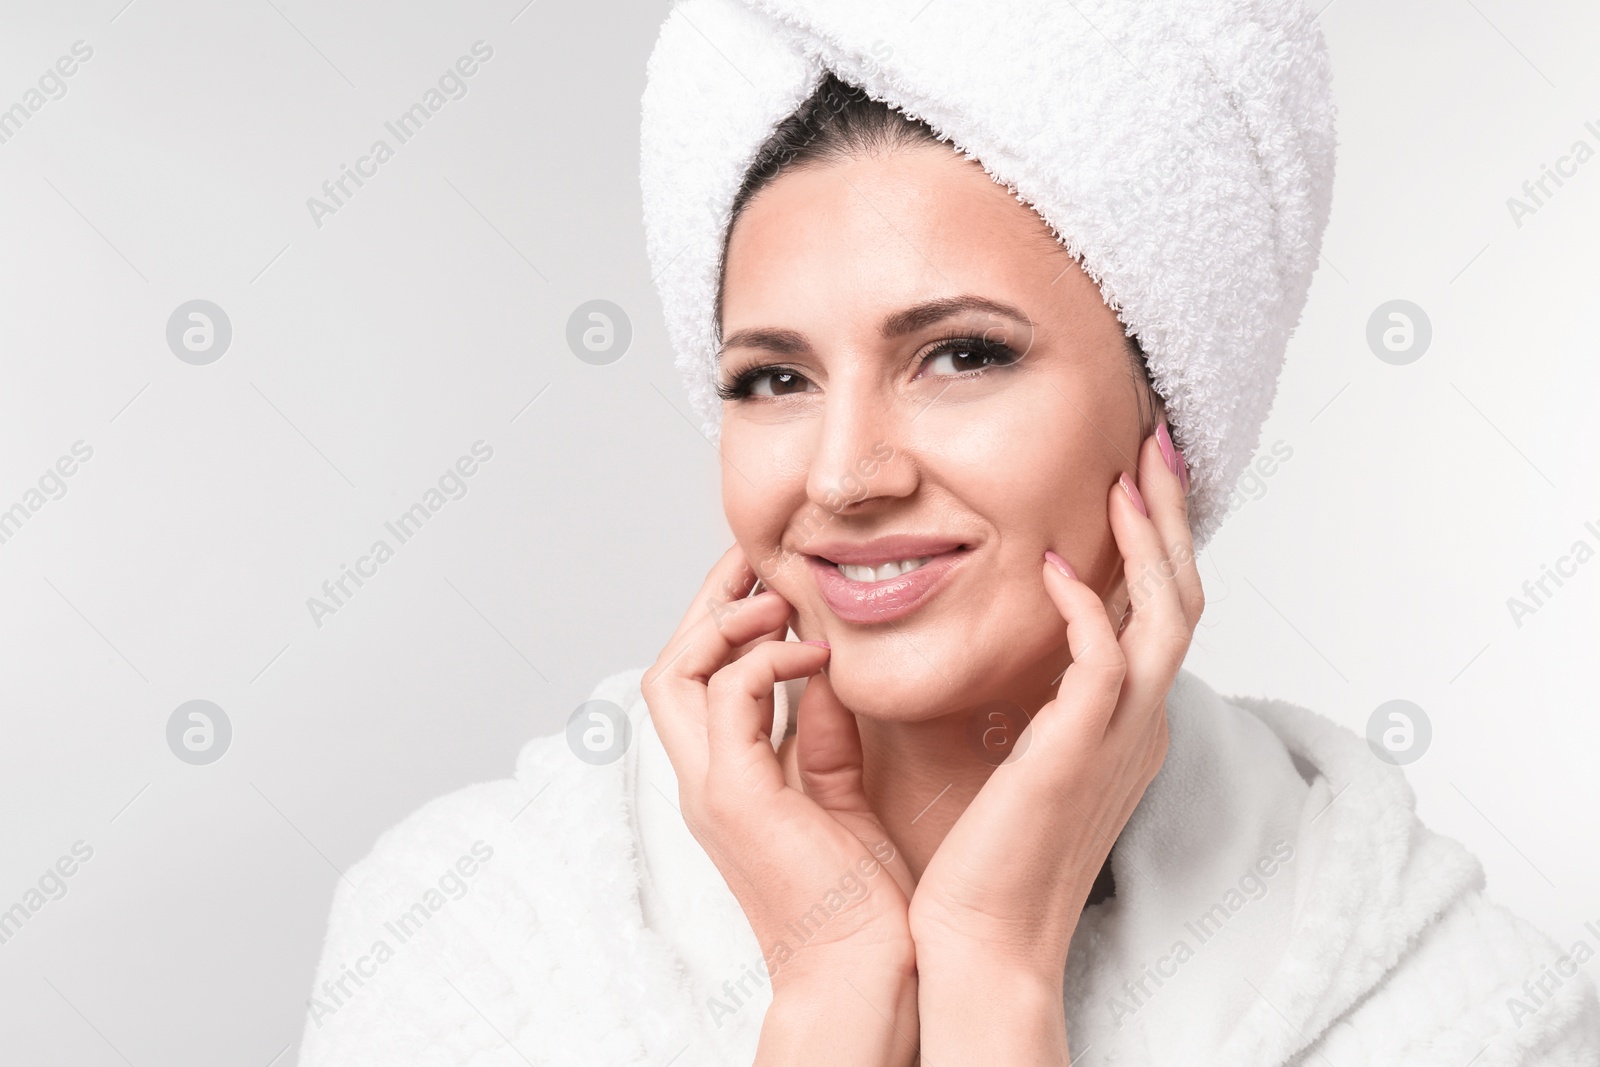 Photo of Beautiful woman with clean skin touching her face on light background